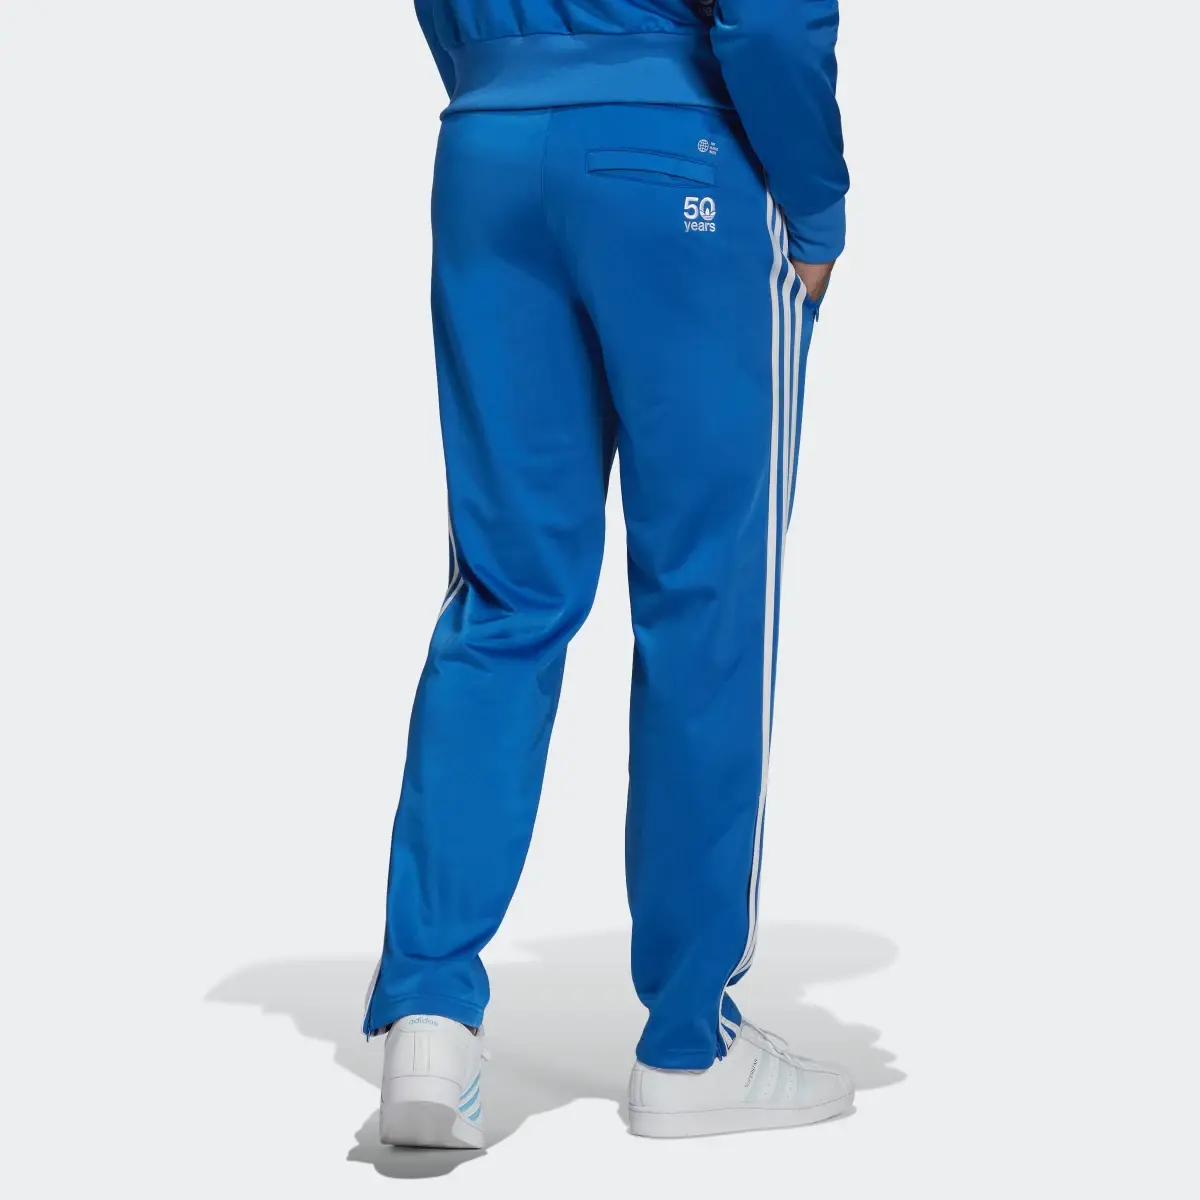 Adidas Graphic Common Memory Tracksuit Bottoms. 3